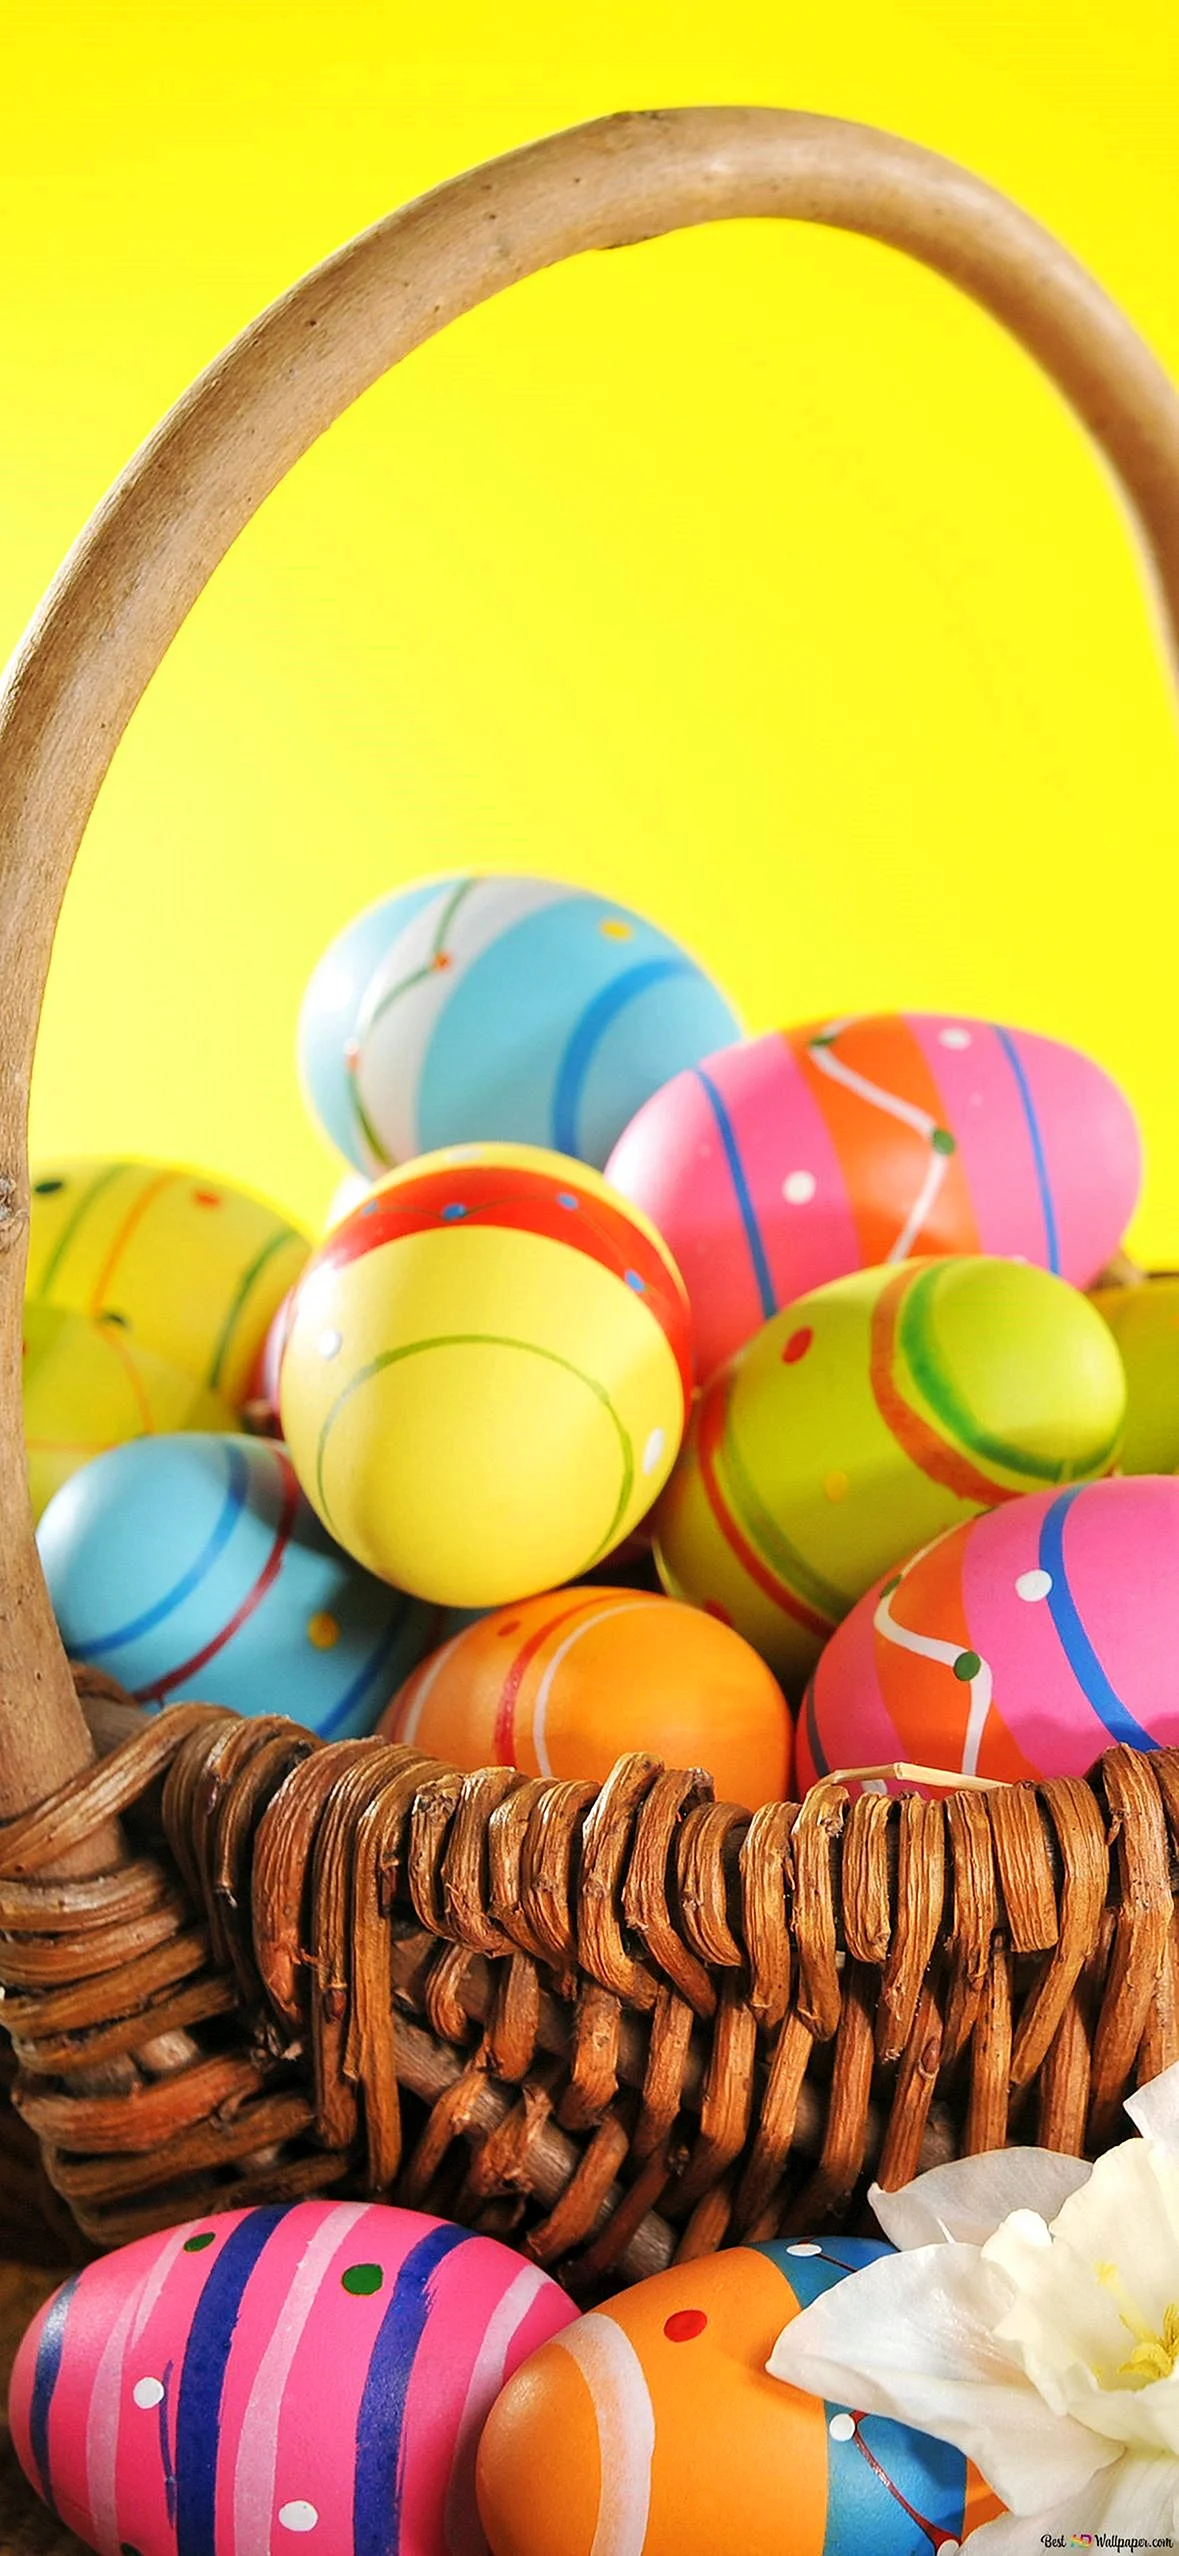 Football Easter Baskets Wallpaper for iPhone 14 Pro